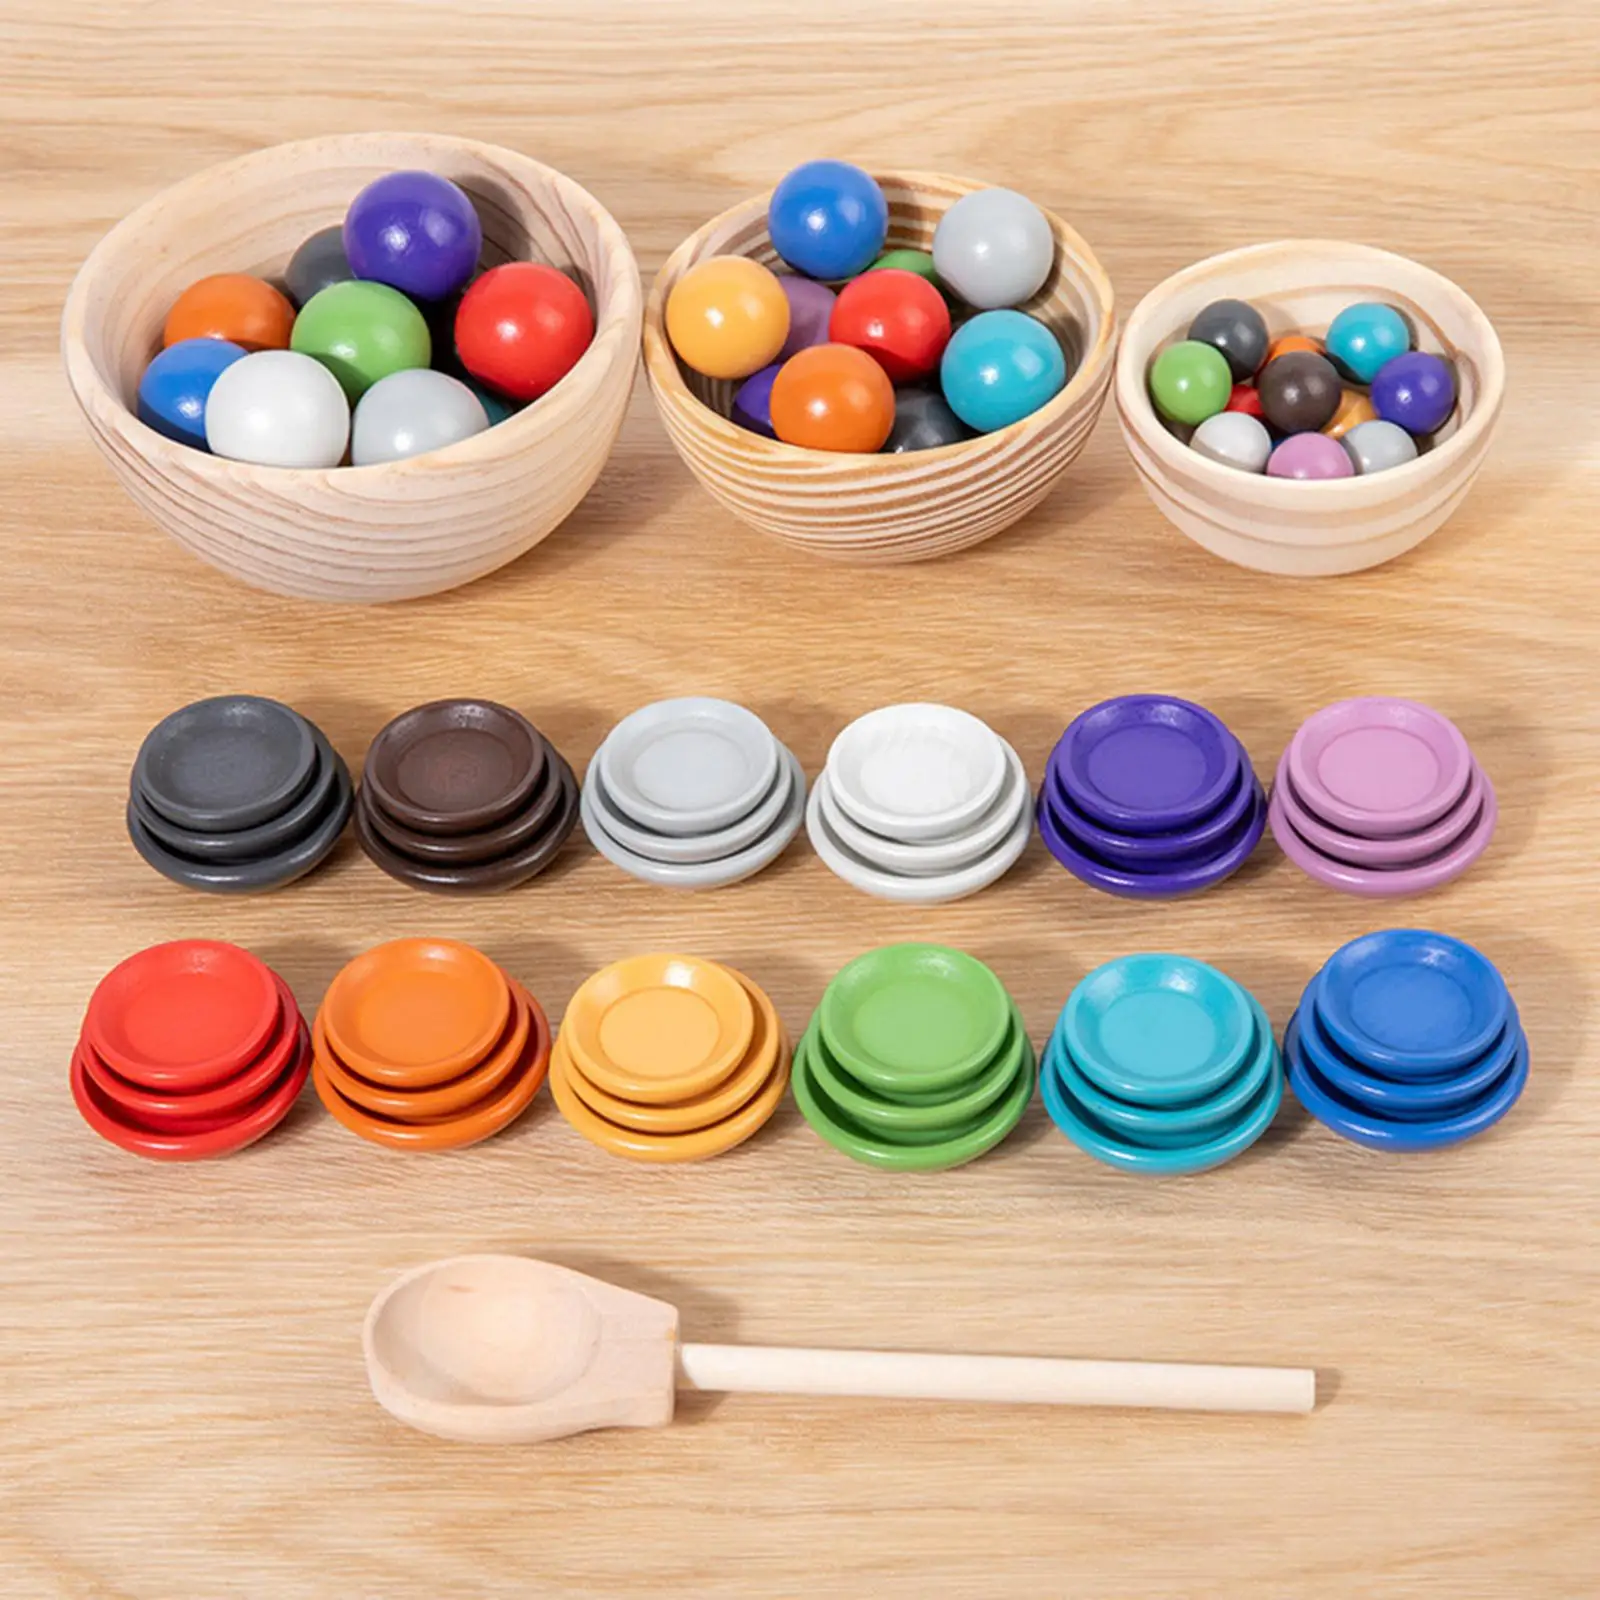 Montessori Wooden Rainbow Ball Matching Game Preschool Learning Toy with 36 Balls Early Education Toys for Age 1+ Xmas Gifts